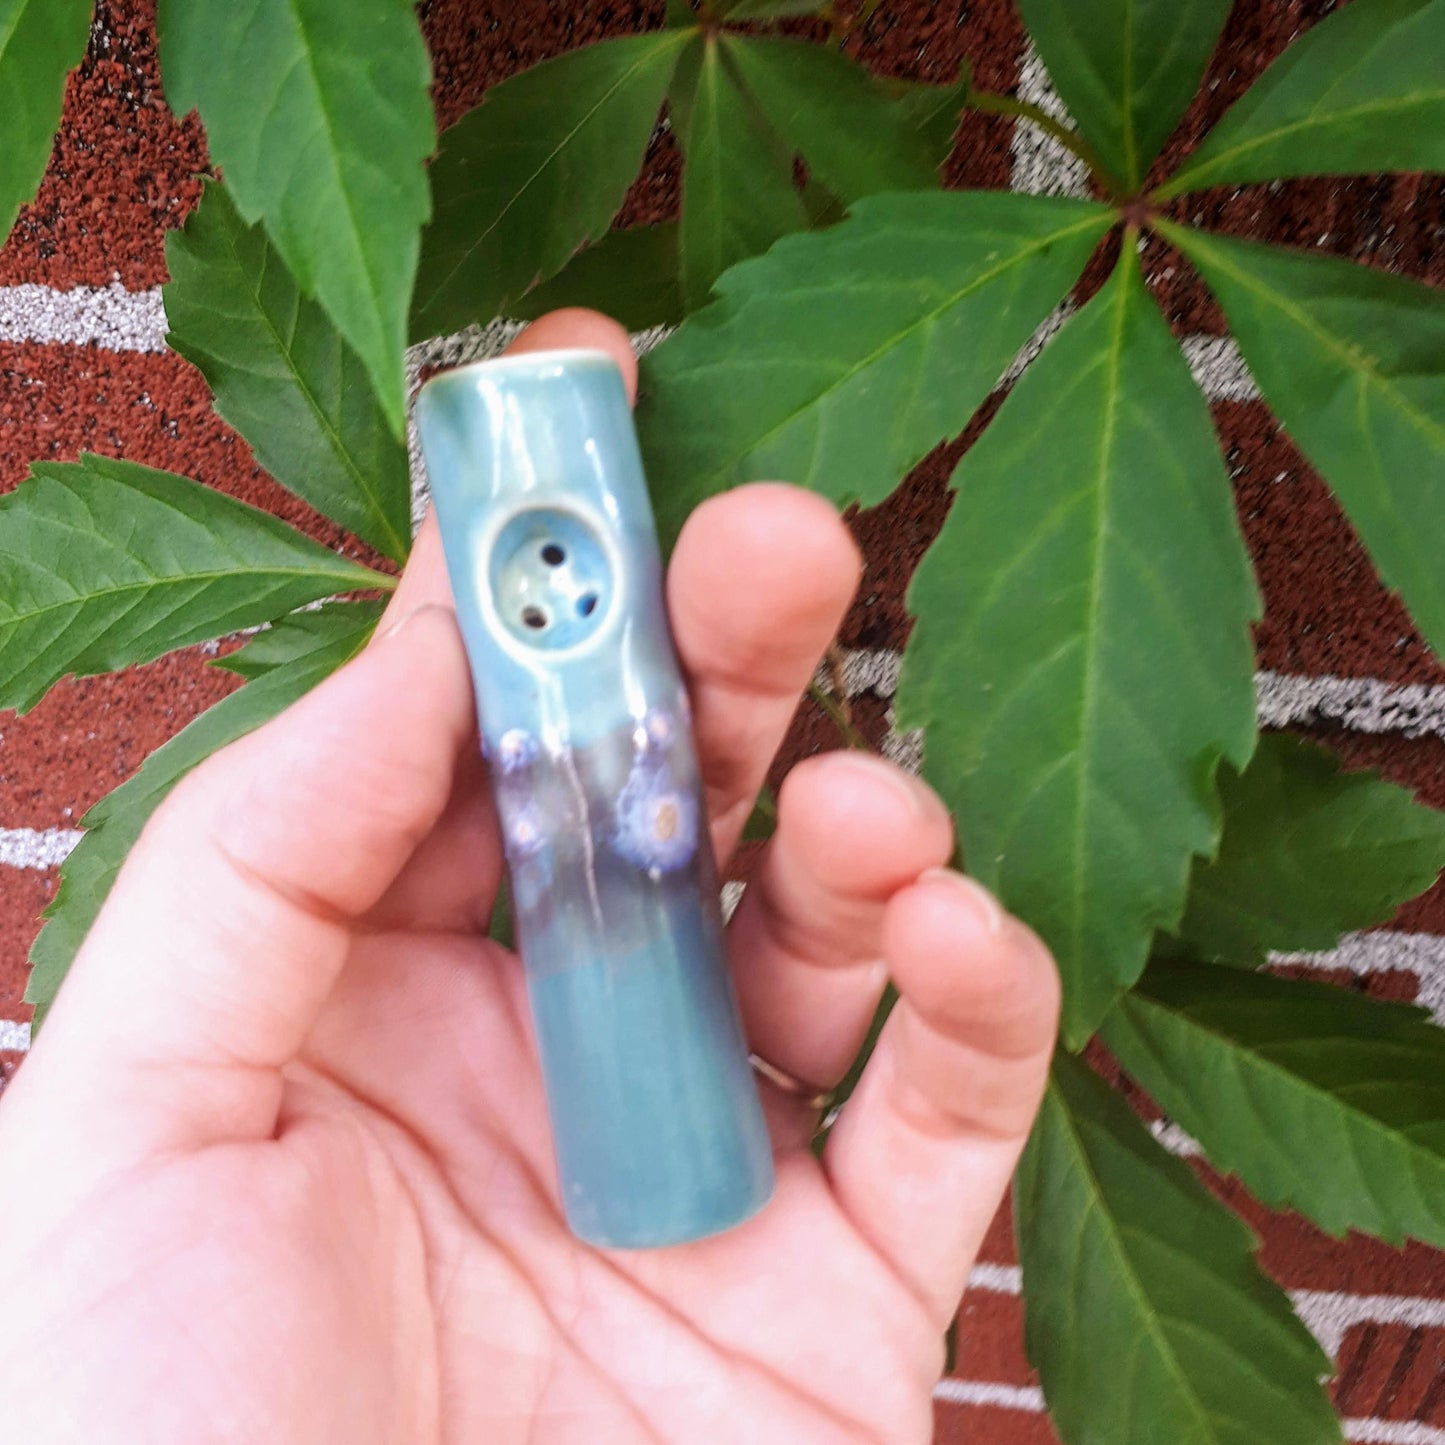 Blue Dream mini purse pipe held in hand against brick wall covered in leaves